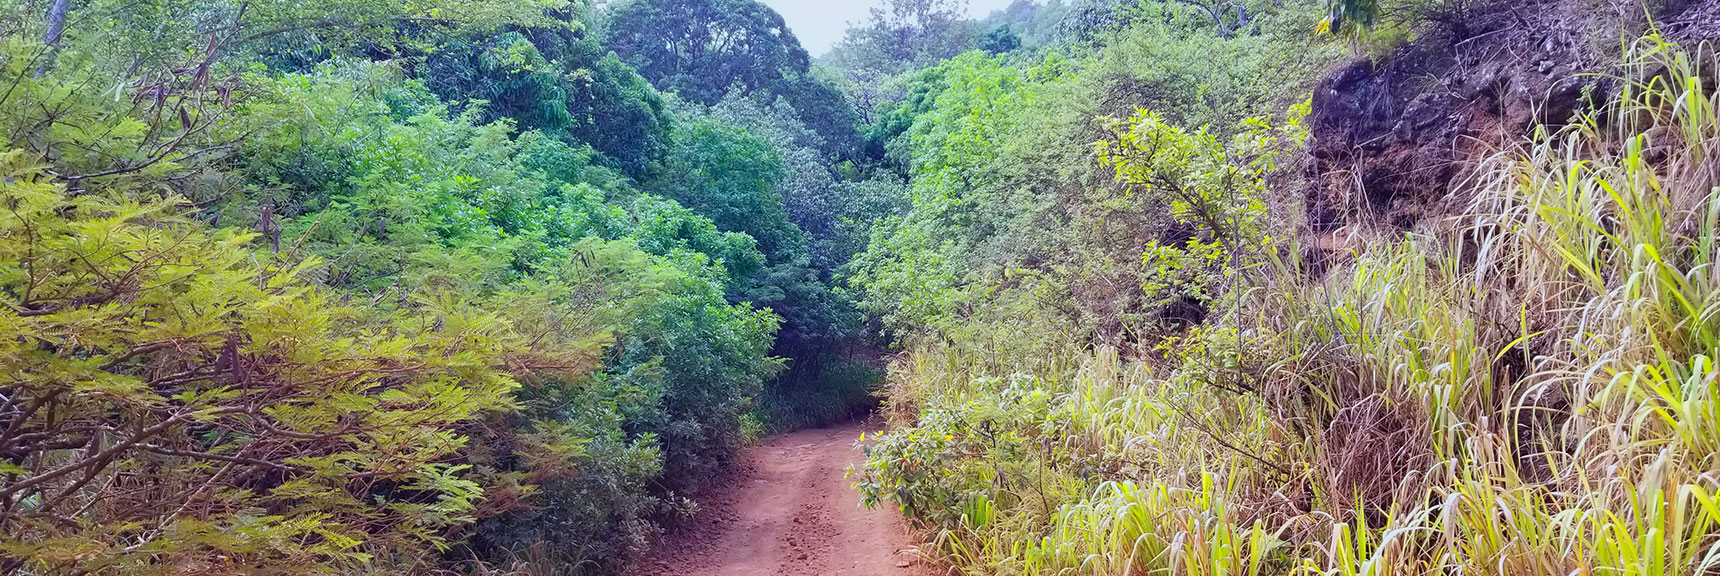 Entering the Jungle Area at the Base of the Eastern Gorge | Hidden Hills and Jungle Above Kahana in West Maui, Hawaii